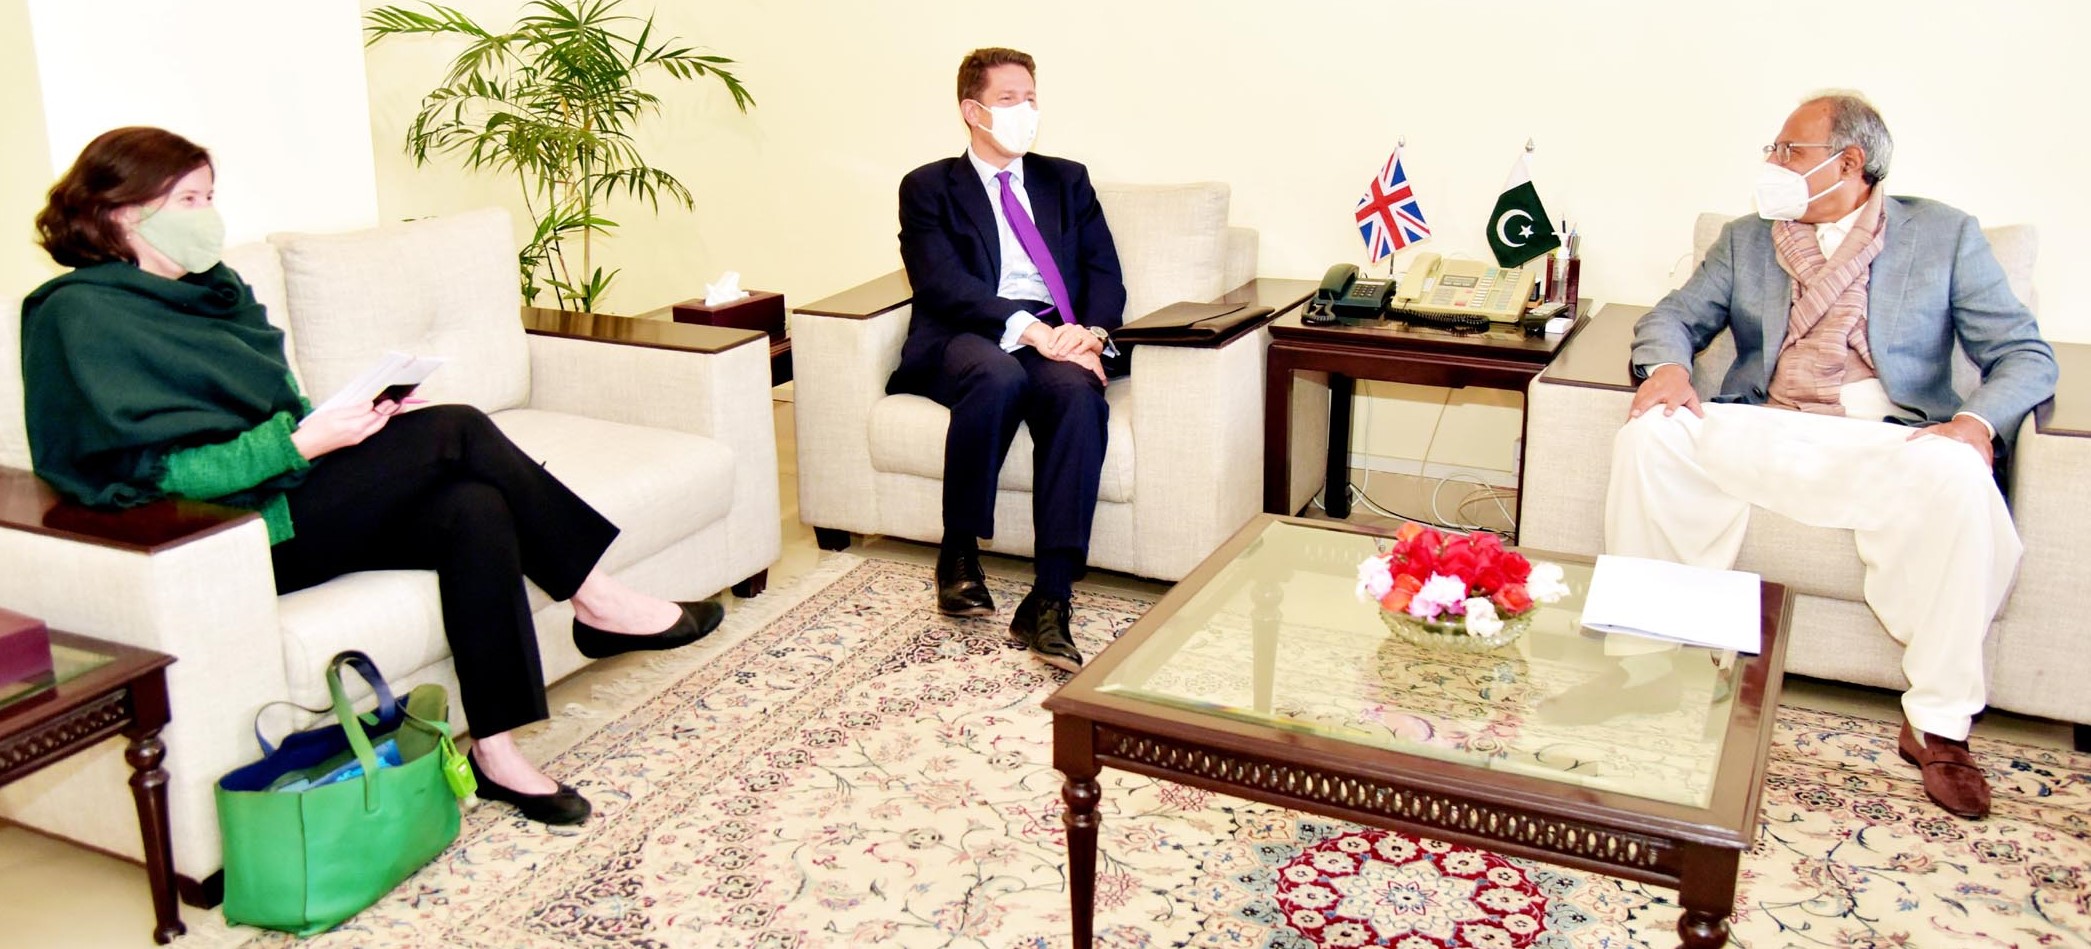 BRITISH HIGH COMMISSIONER, HIS EXCELLENCY DR. CHRISTIAN TURNER CALLED ON THE FEDERAL MINISTER FOR FINANCE AND REVENUE, DR. ABDUL HAFEEZ SHEIKH, AT THE FINANCE DIVISION IN ISLAMABAD ON JANUARY 27, 2021. H.E. HIGH COMMISSIONER WAS ACCOMPANIED BY HEAD OF DEVELOPMENT MS. ANNABEL GERRY ON THE OCCASION.